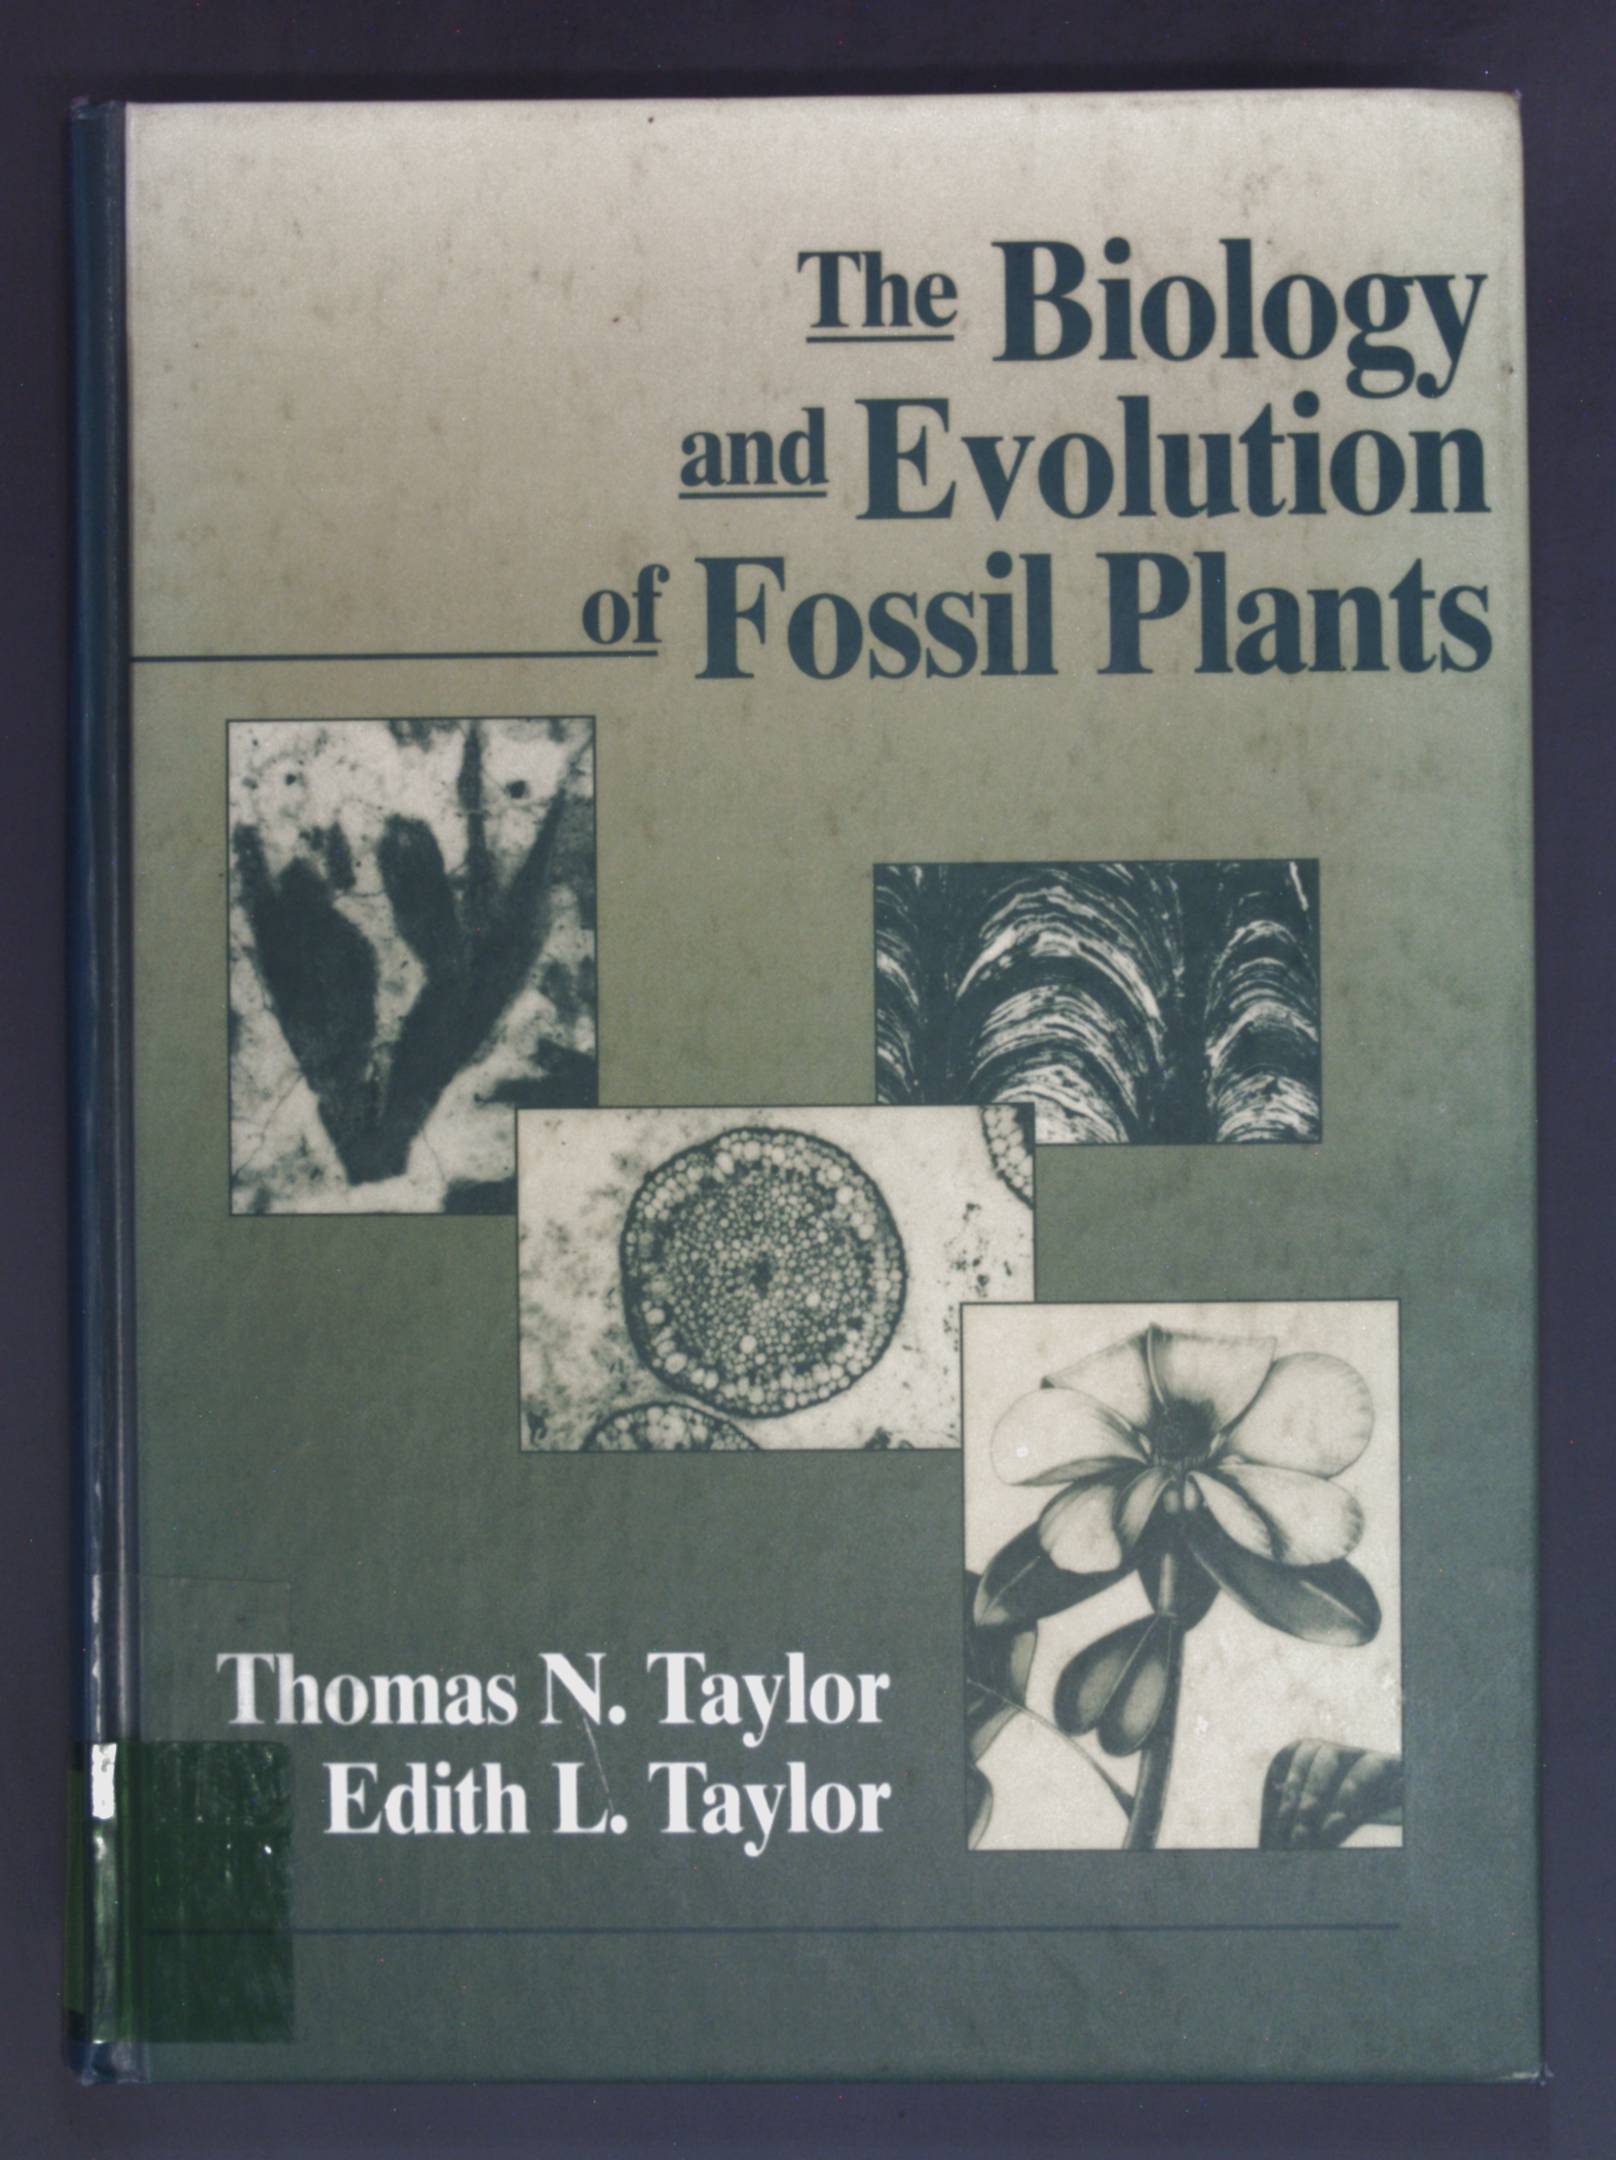 The Biology and Evolution of Fossil Plants. - Taylor, Thomas N. and Edith L. Taylor